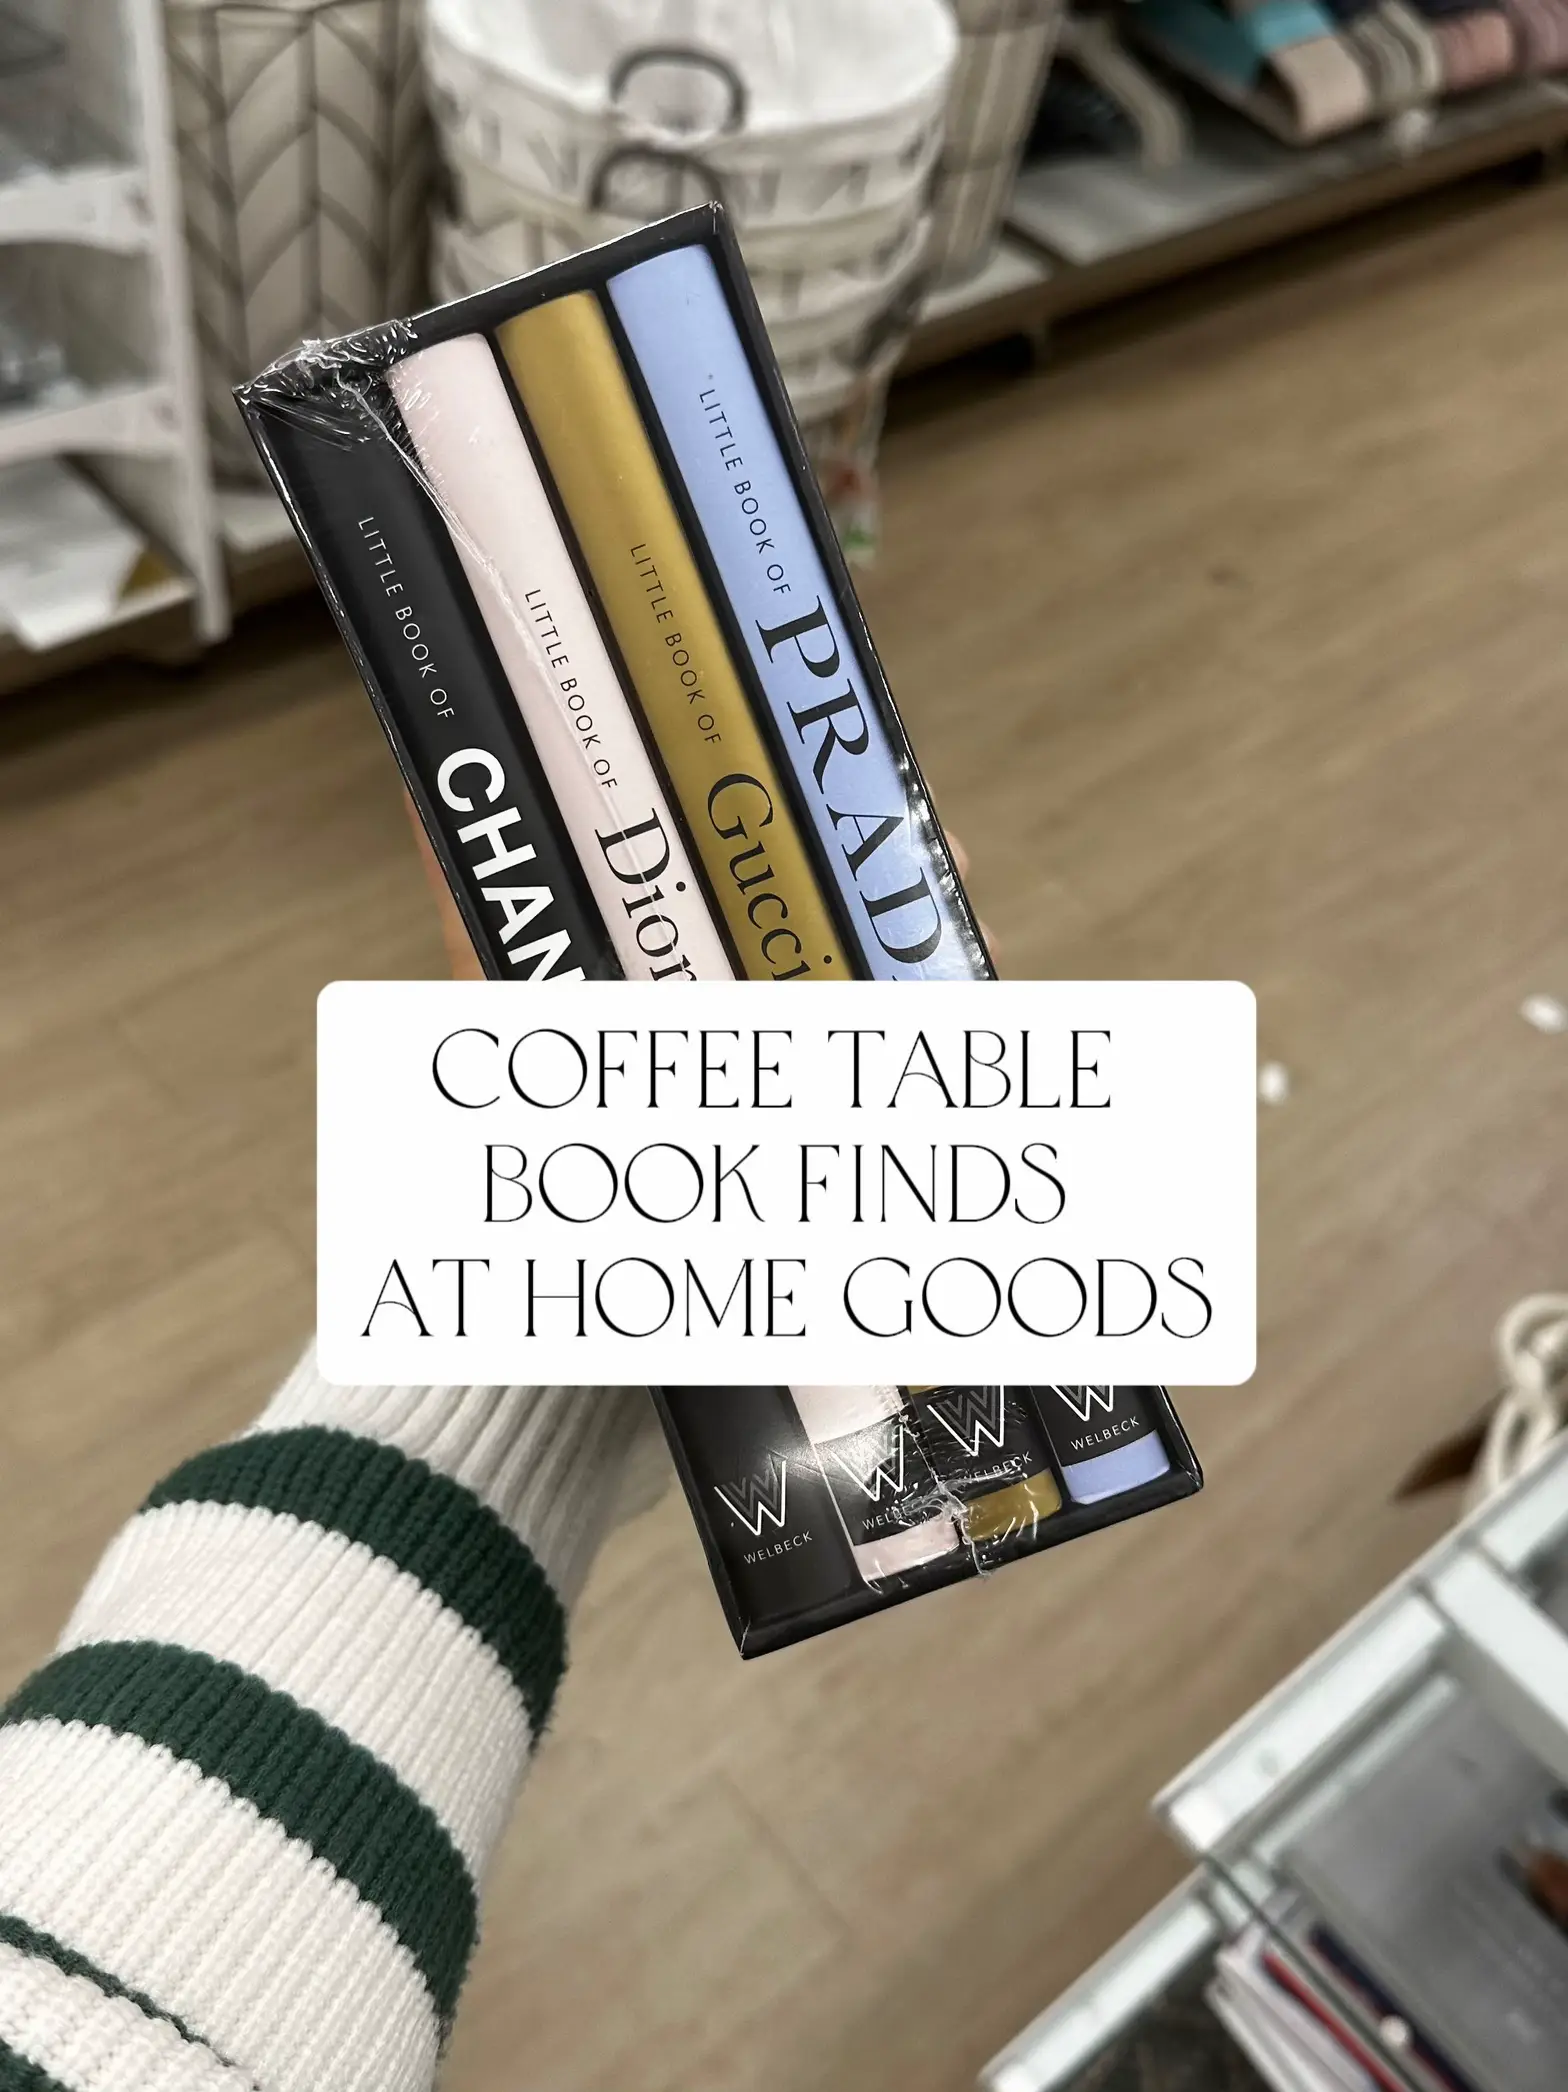 COFFE TABLE BOOK FINDS AT HOME GOODS, Gallery posted by Shannen Olan